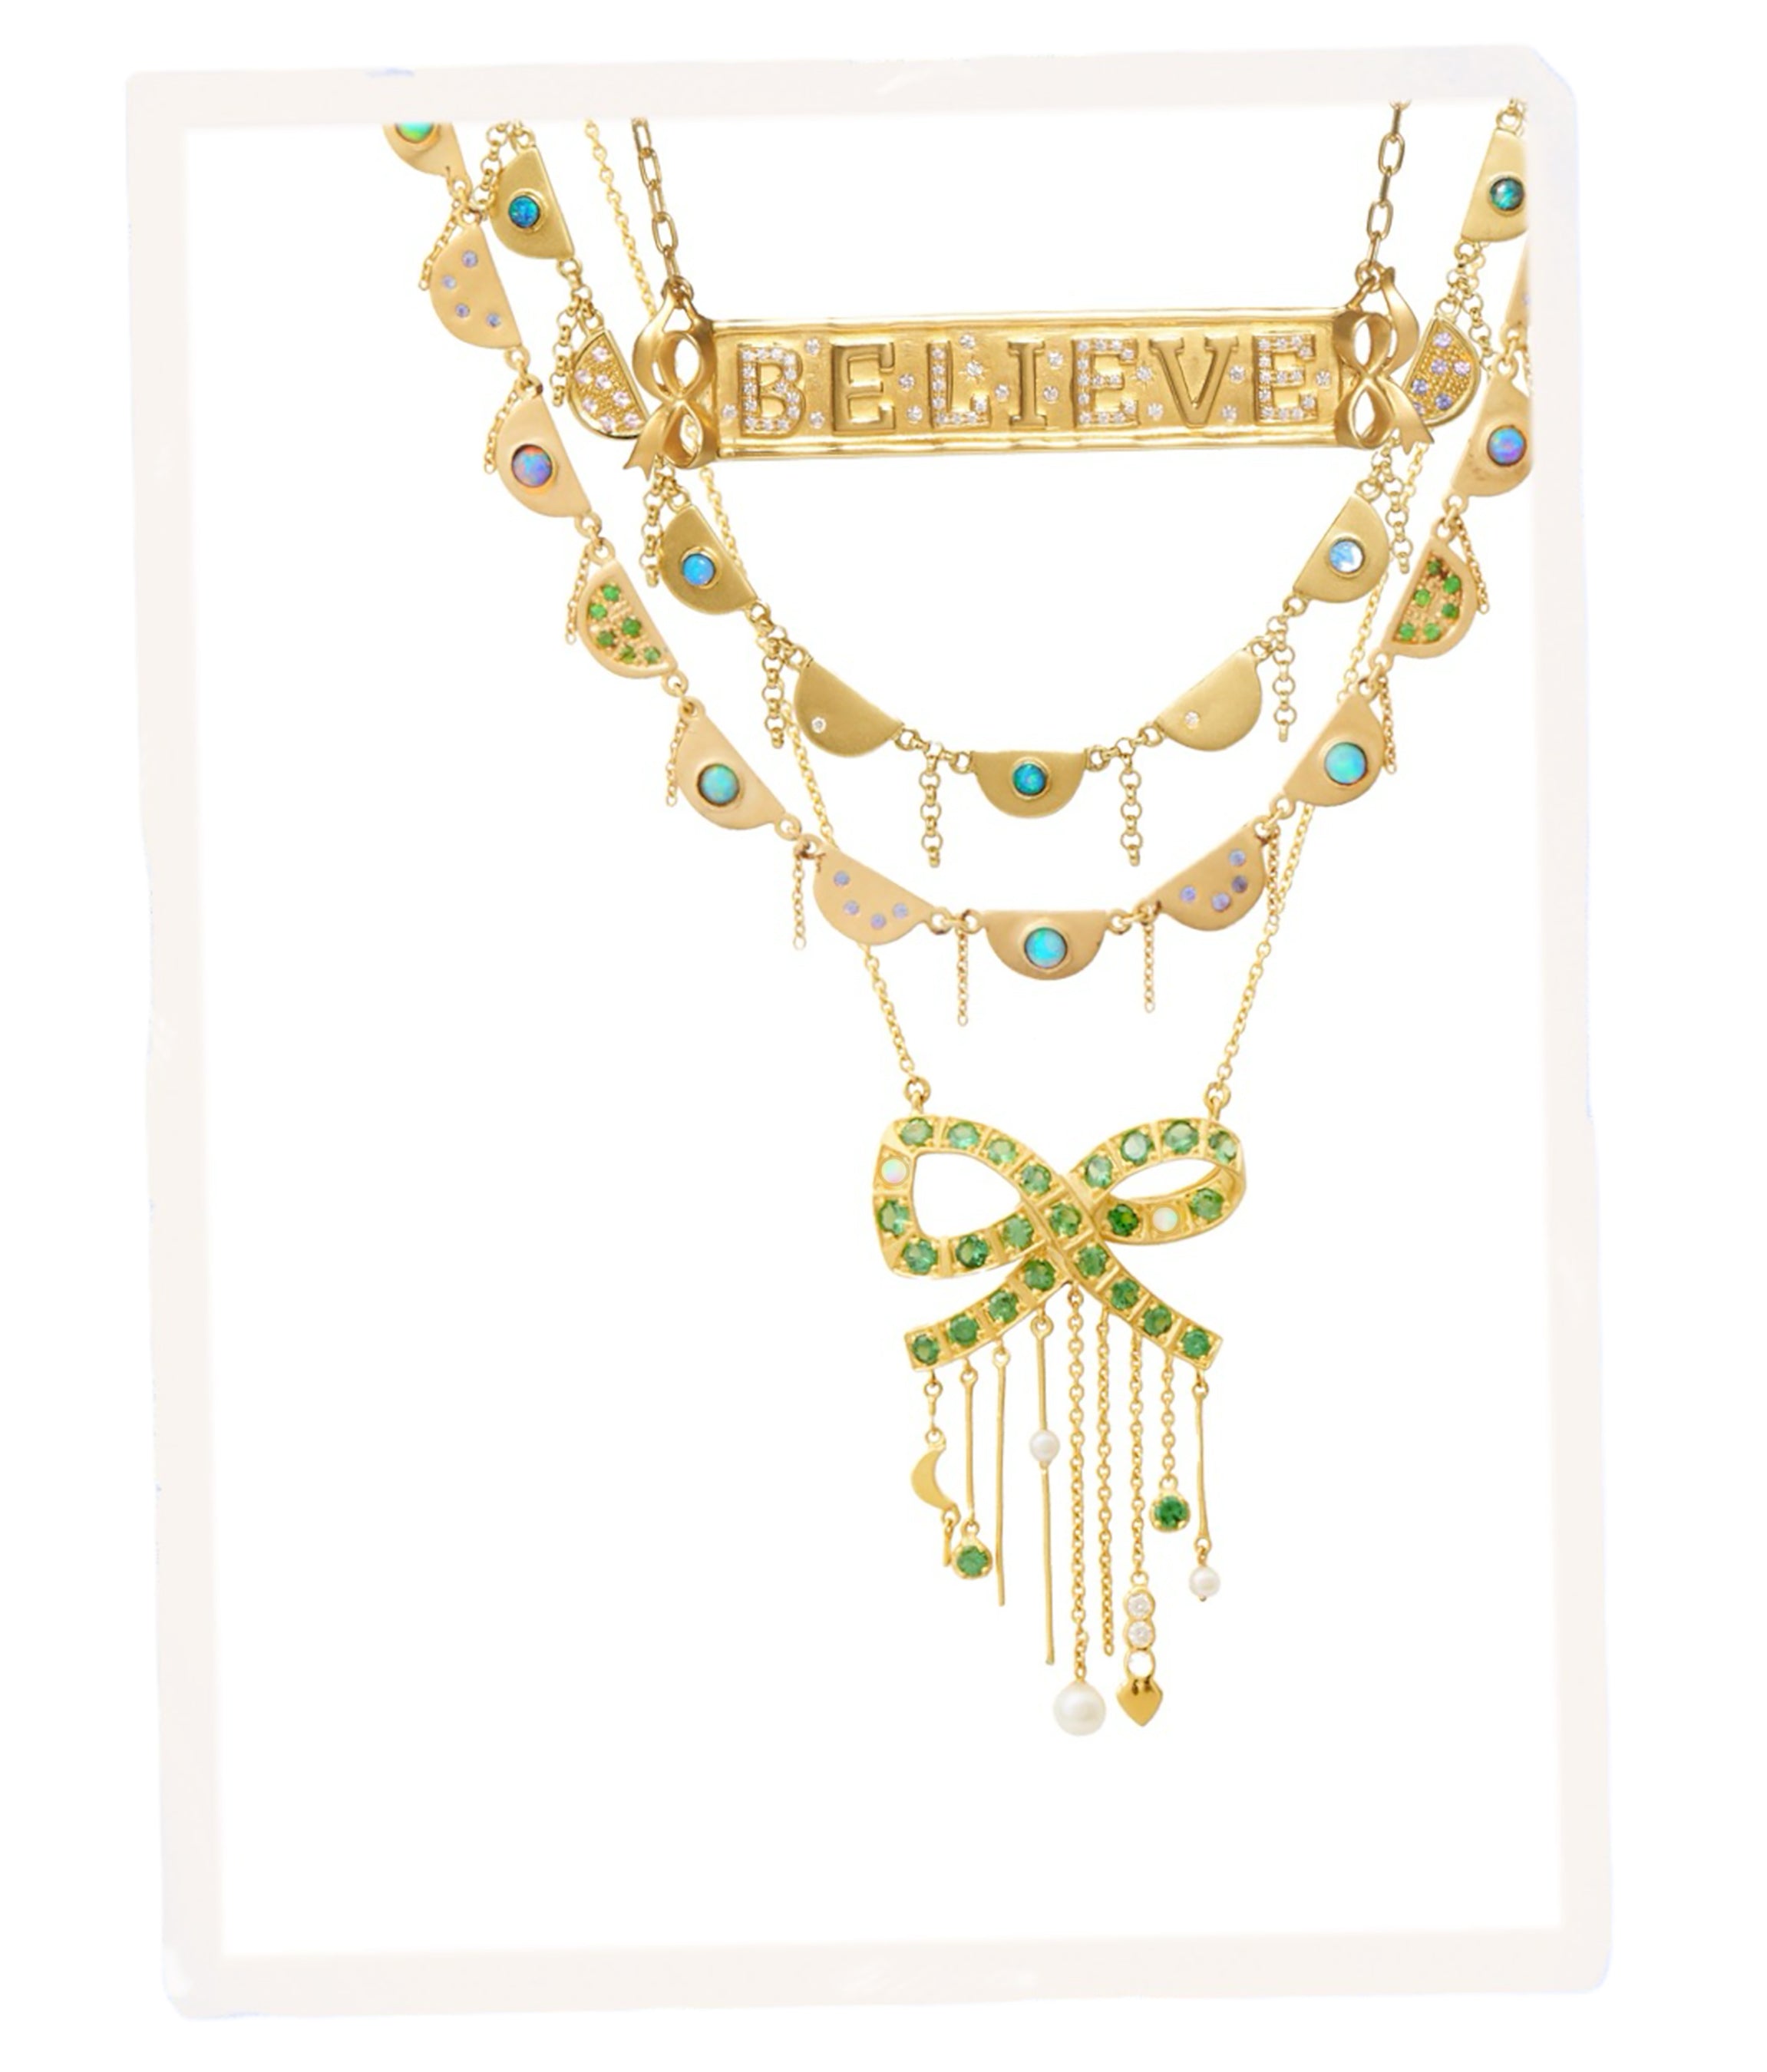 Unhada jewelry layered necklaces -Chantal in 18k yellow gold with tanzanite, opal, emerald. Tsavorite, gold bow necklace with pearls and opals. Pavé diamond believe nameplate necklace with bows.